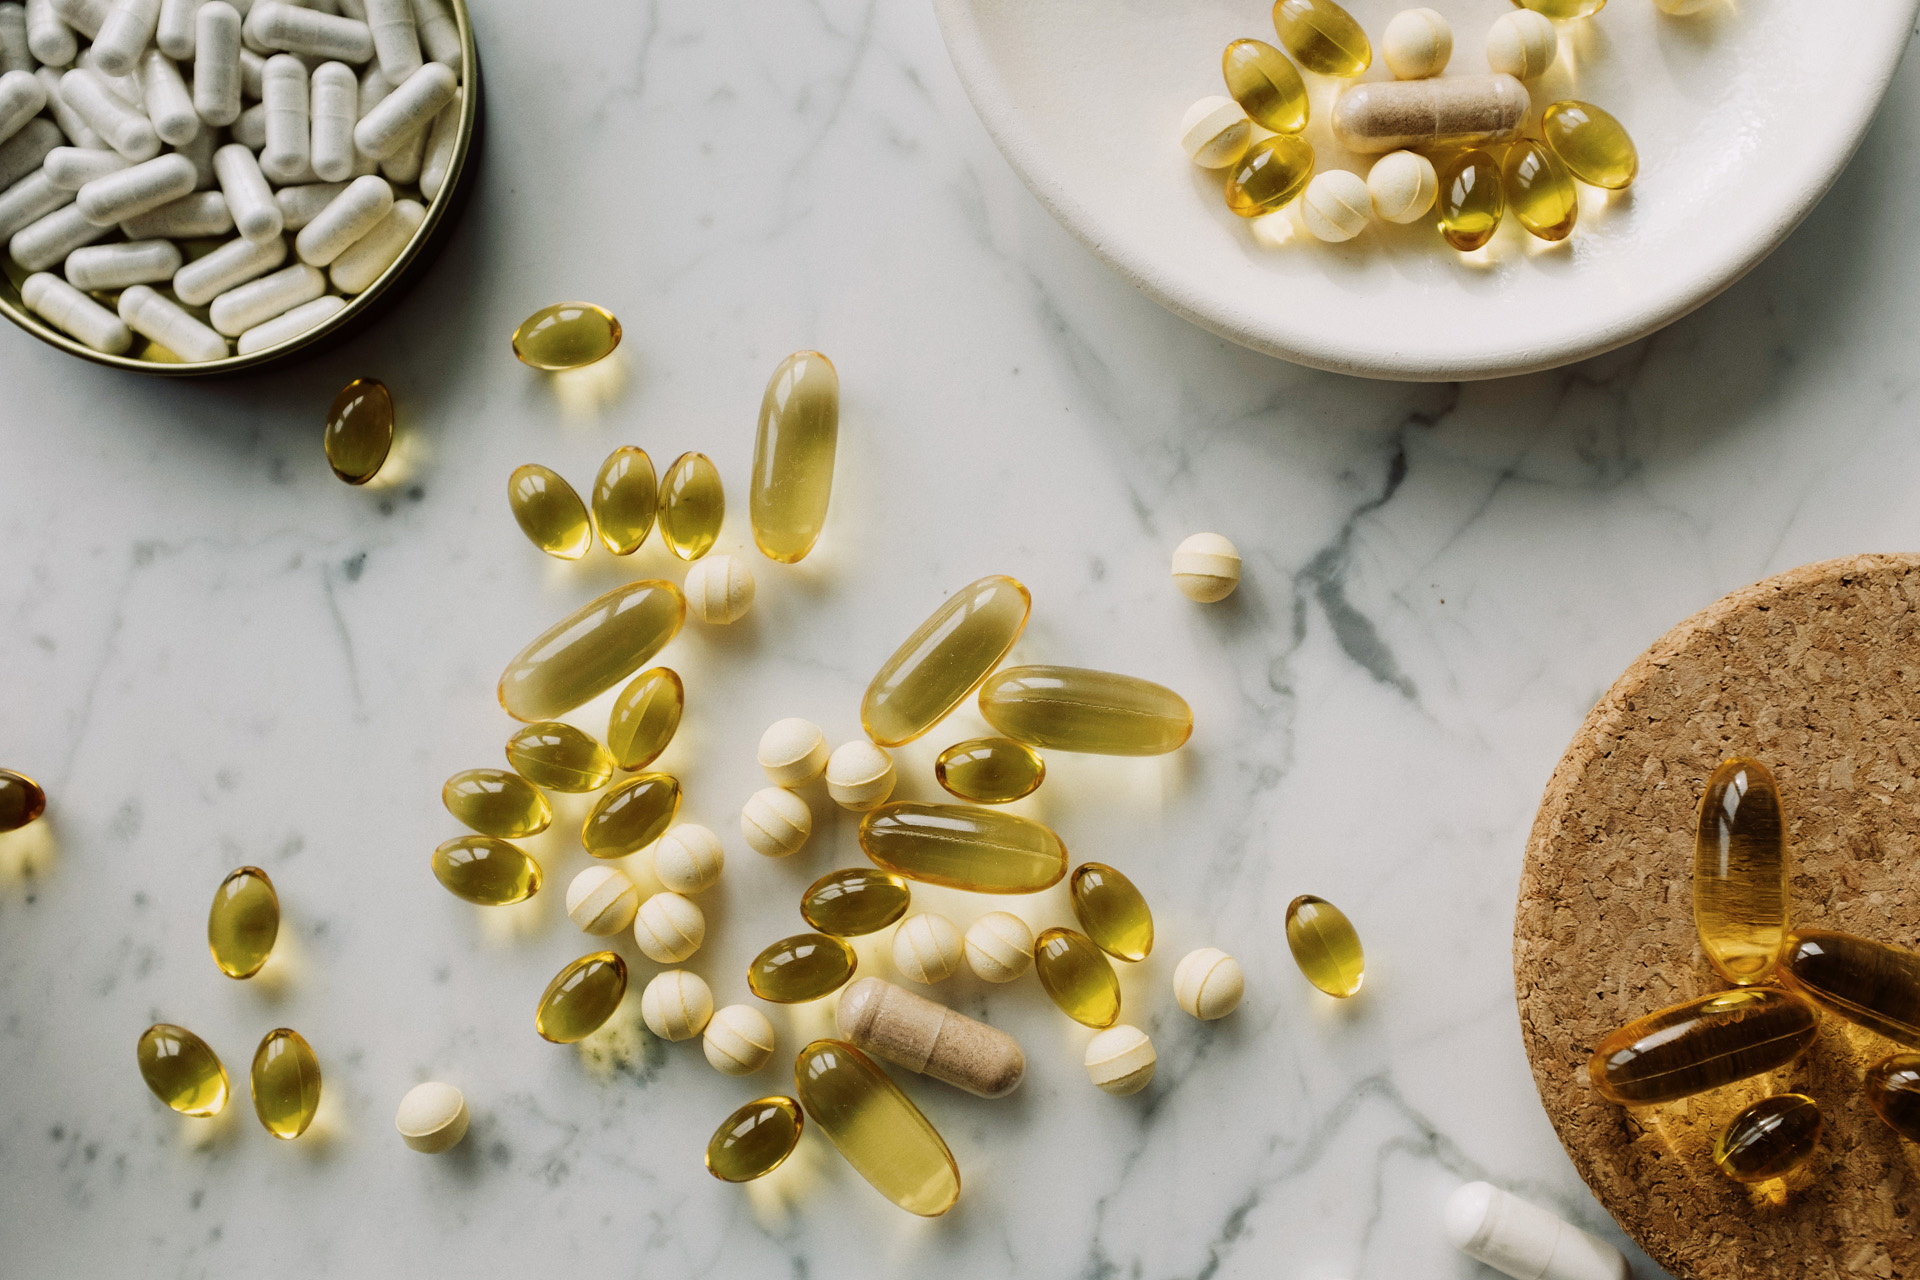 Supplements can benefit your health during Veganuary